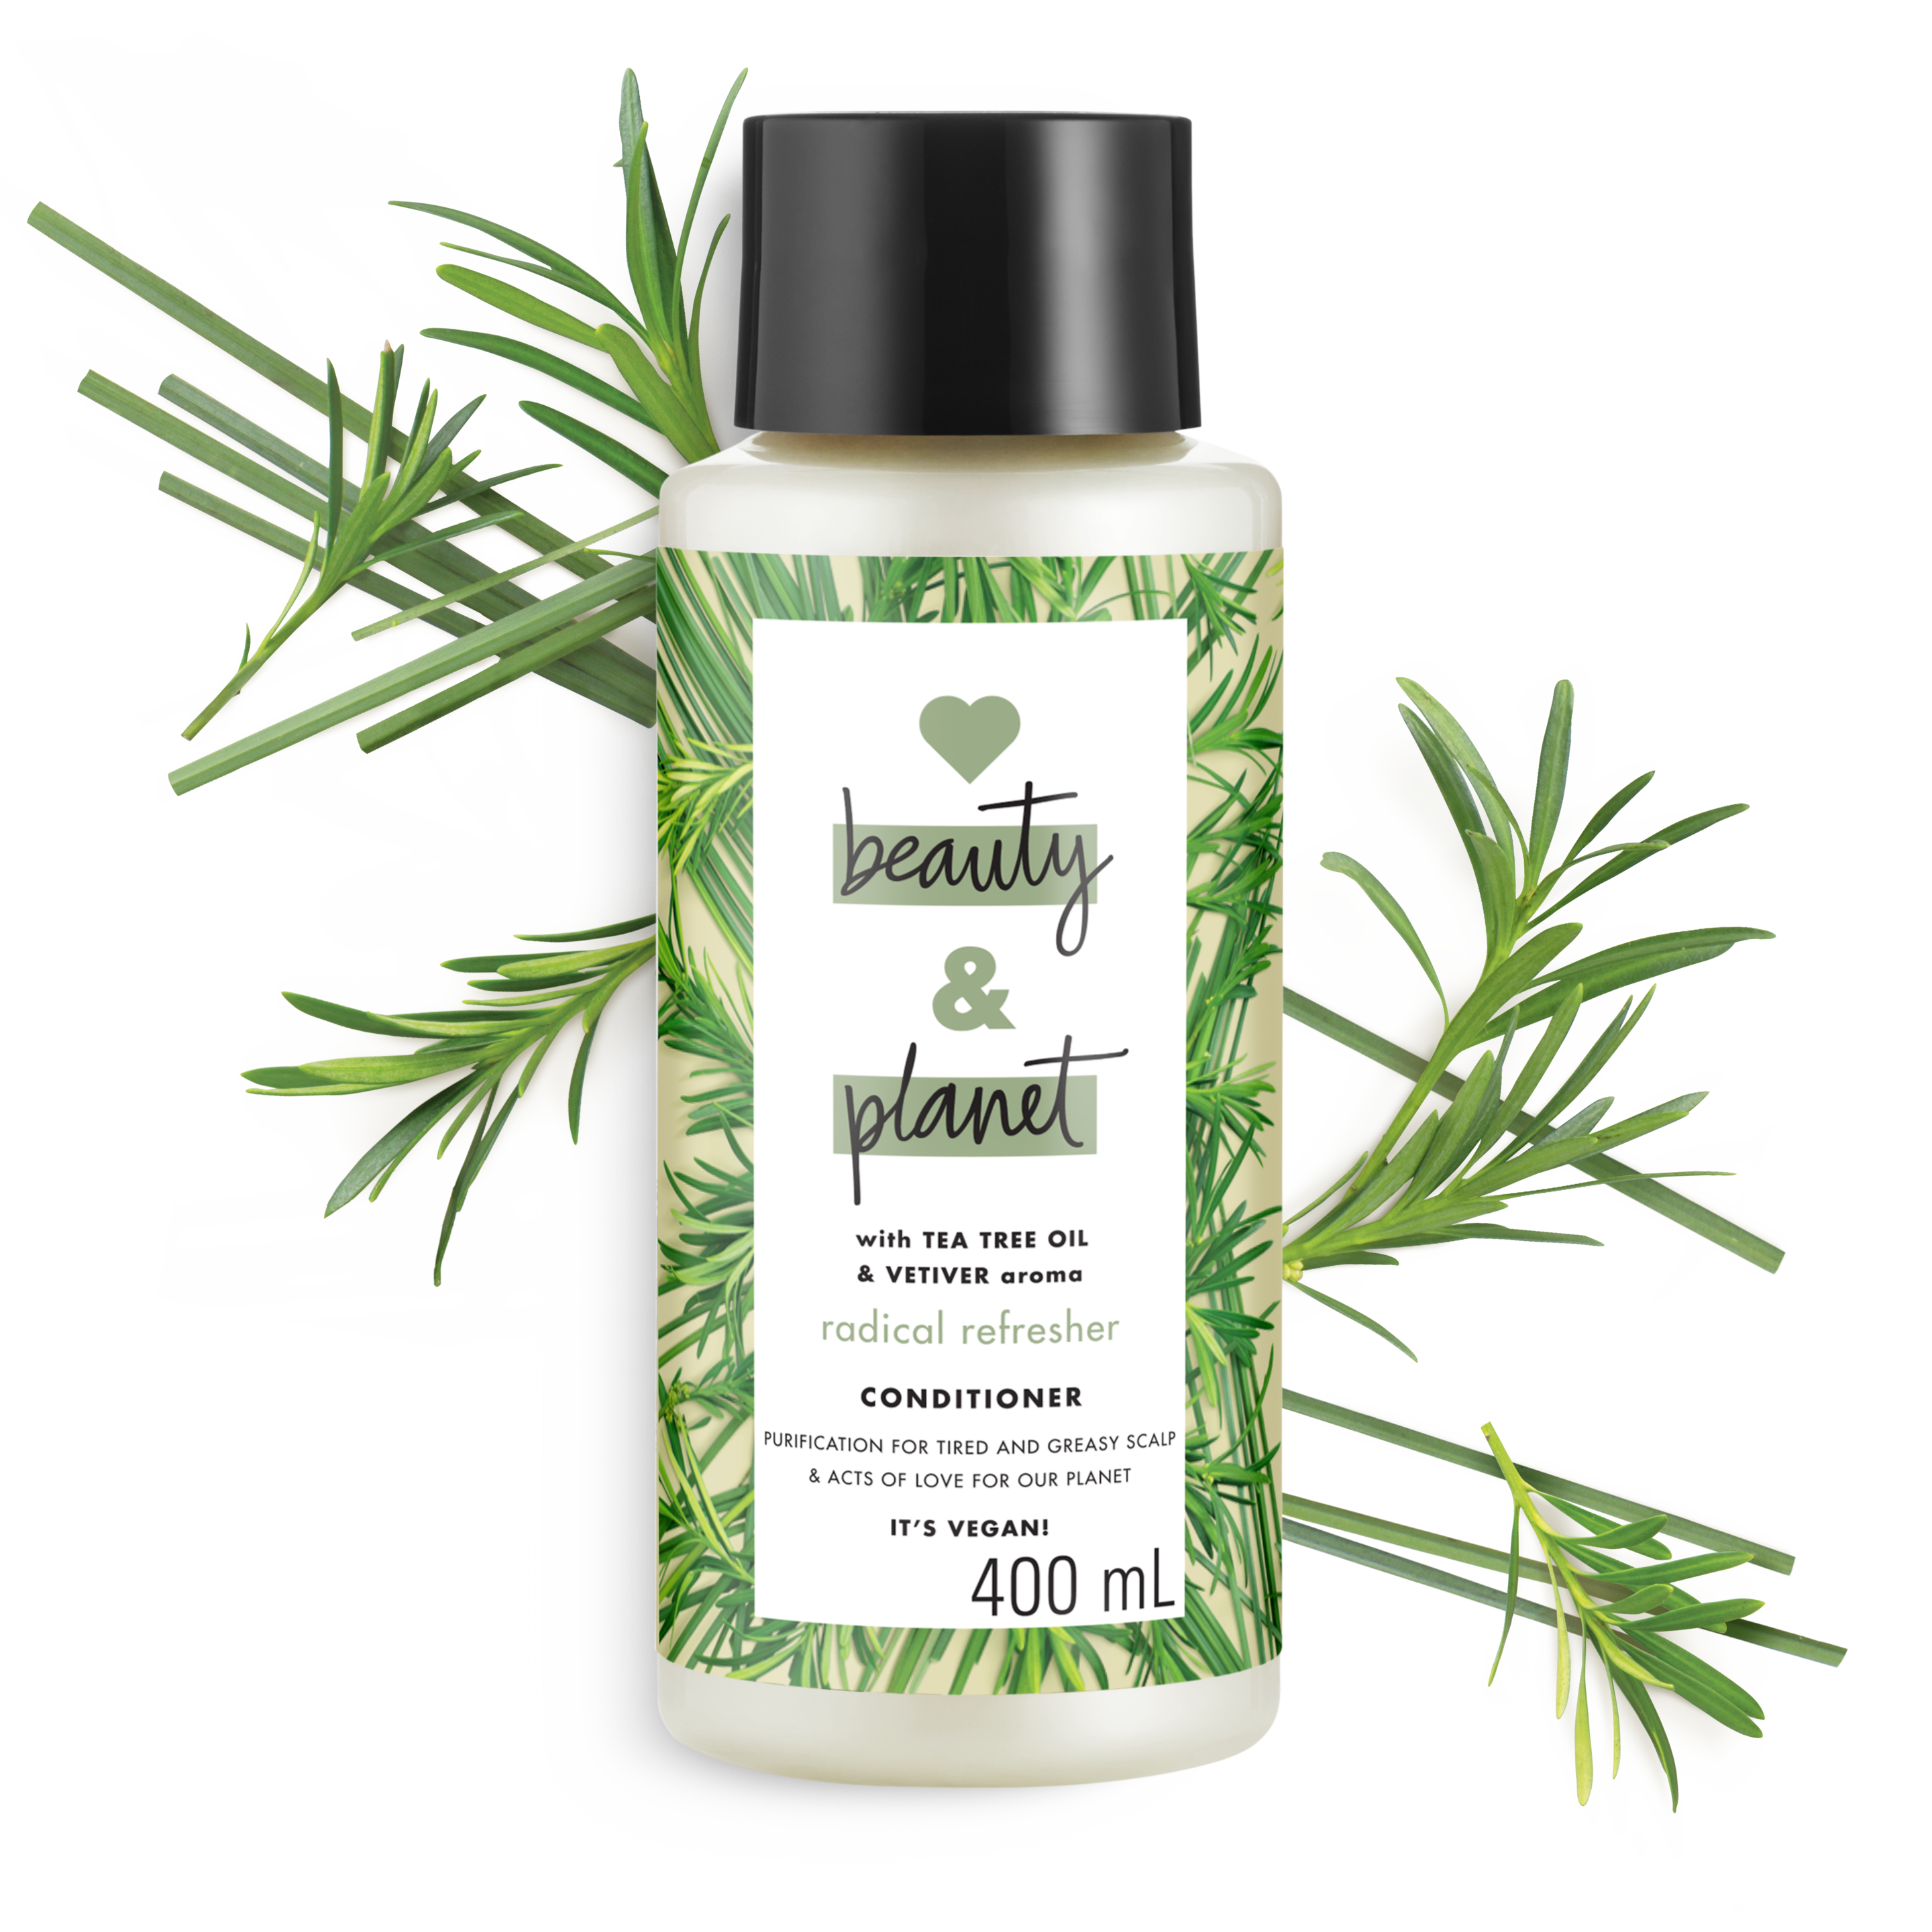 Radical Refresher Tea Tree Oil & Vetiver Conditioner Text